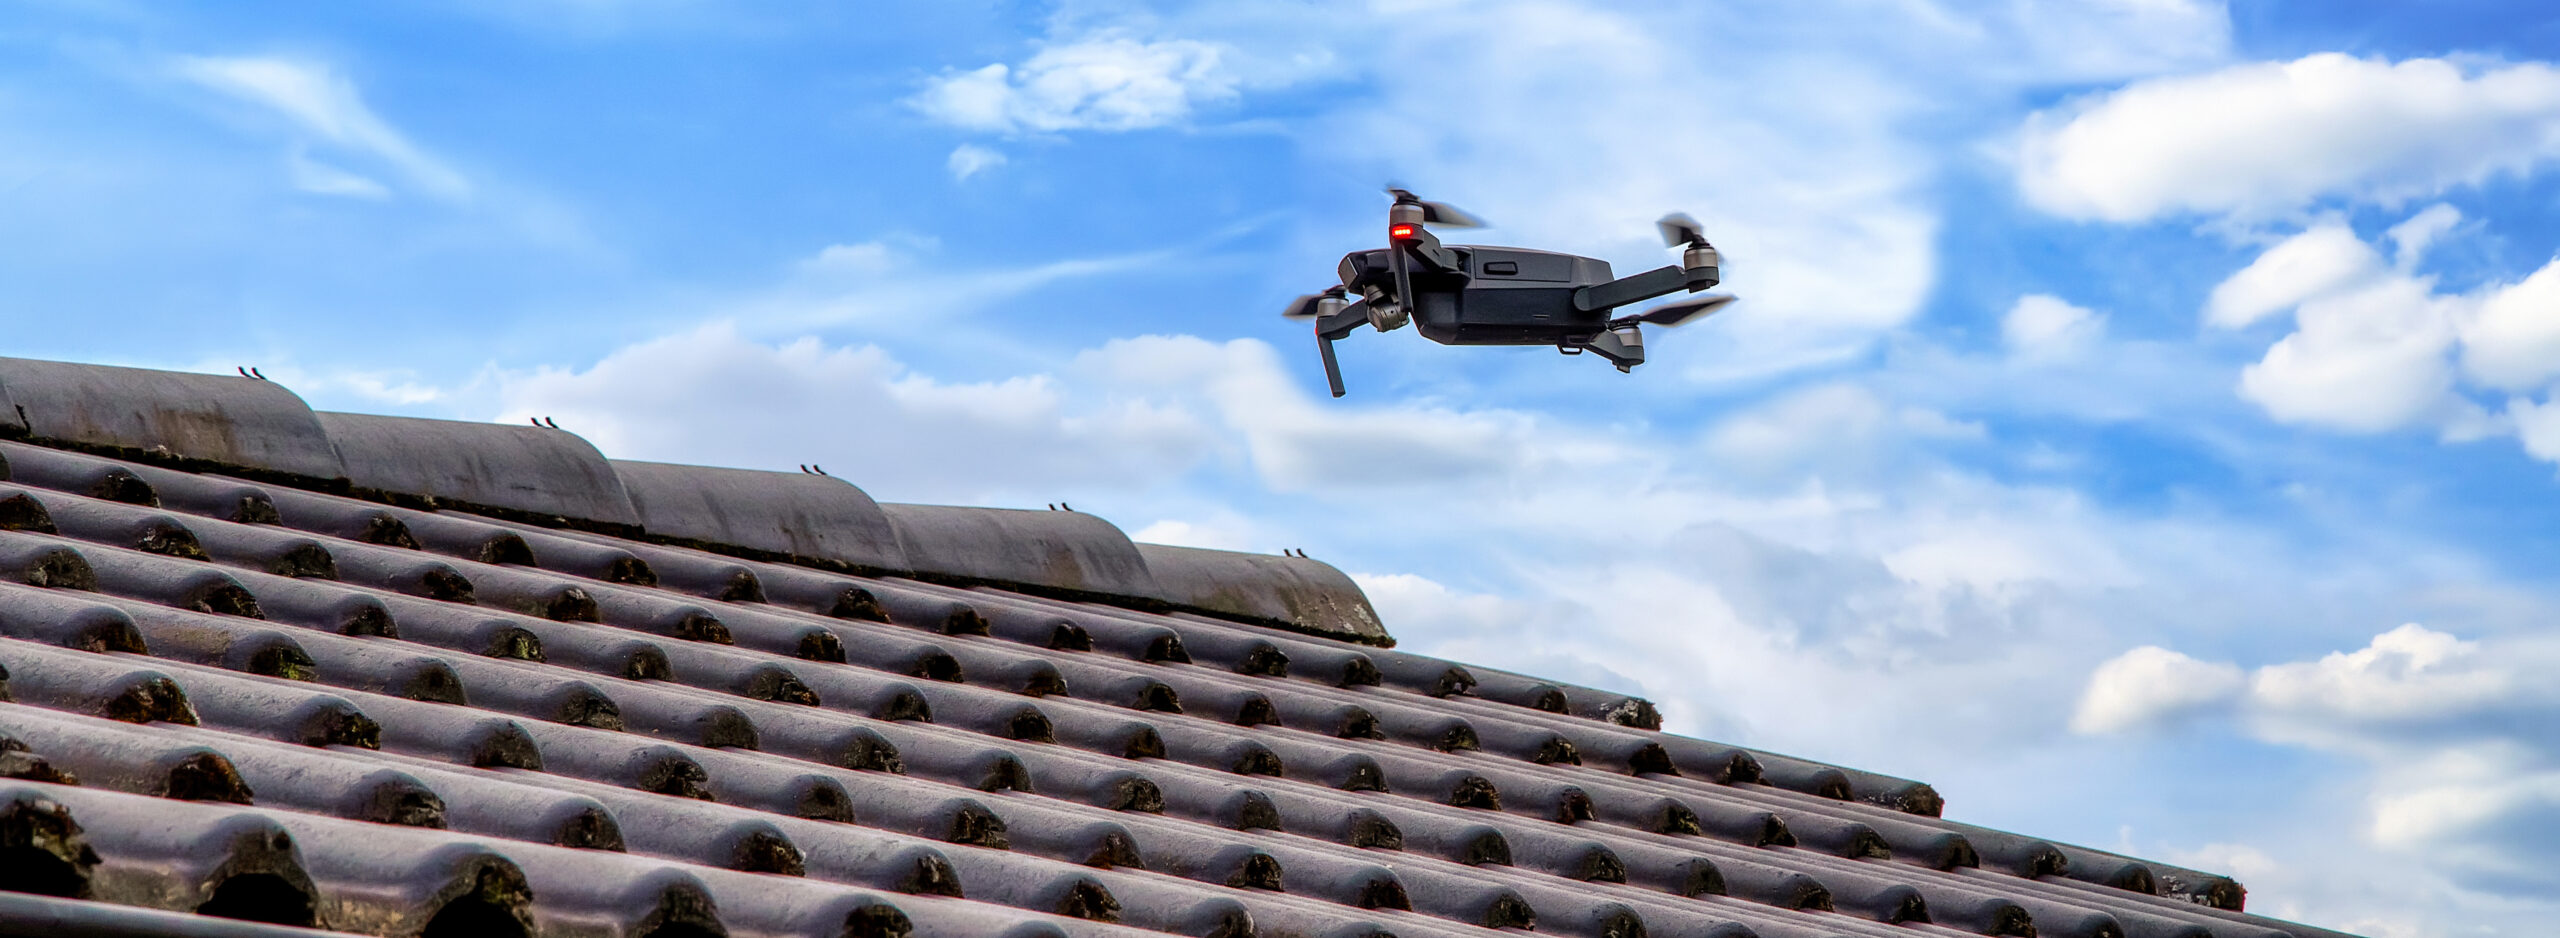 Drone in the air inspecting the roof over the house. Close-up of